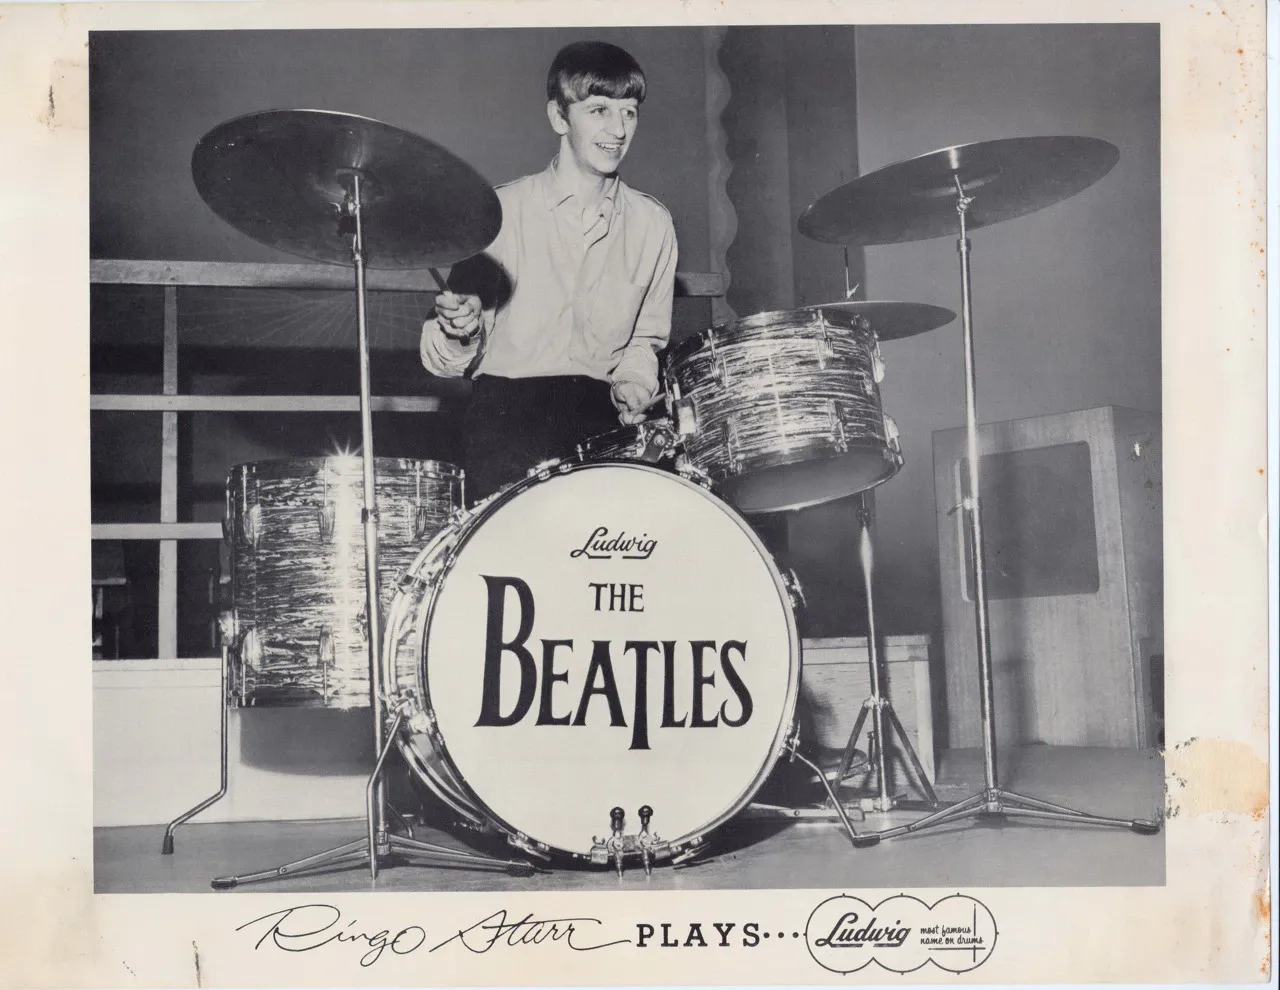 Ringo playing drums in the early days of the Beatles